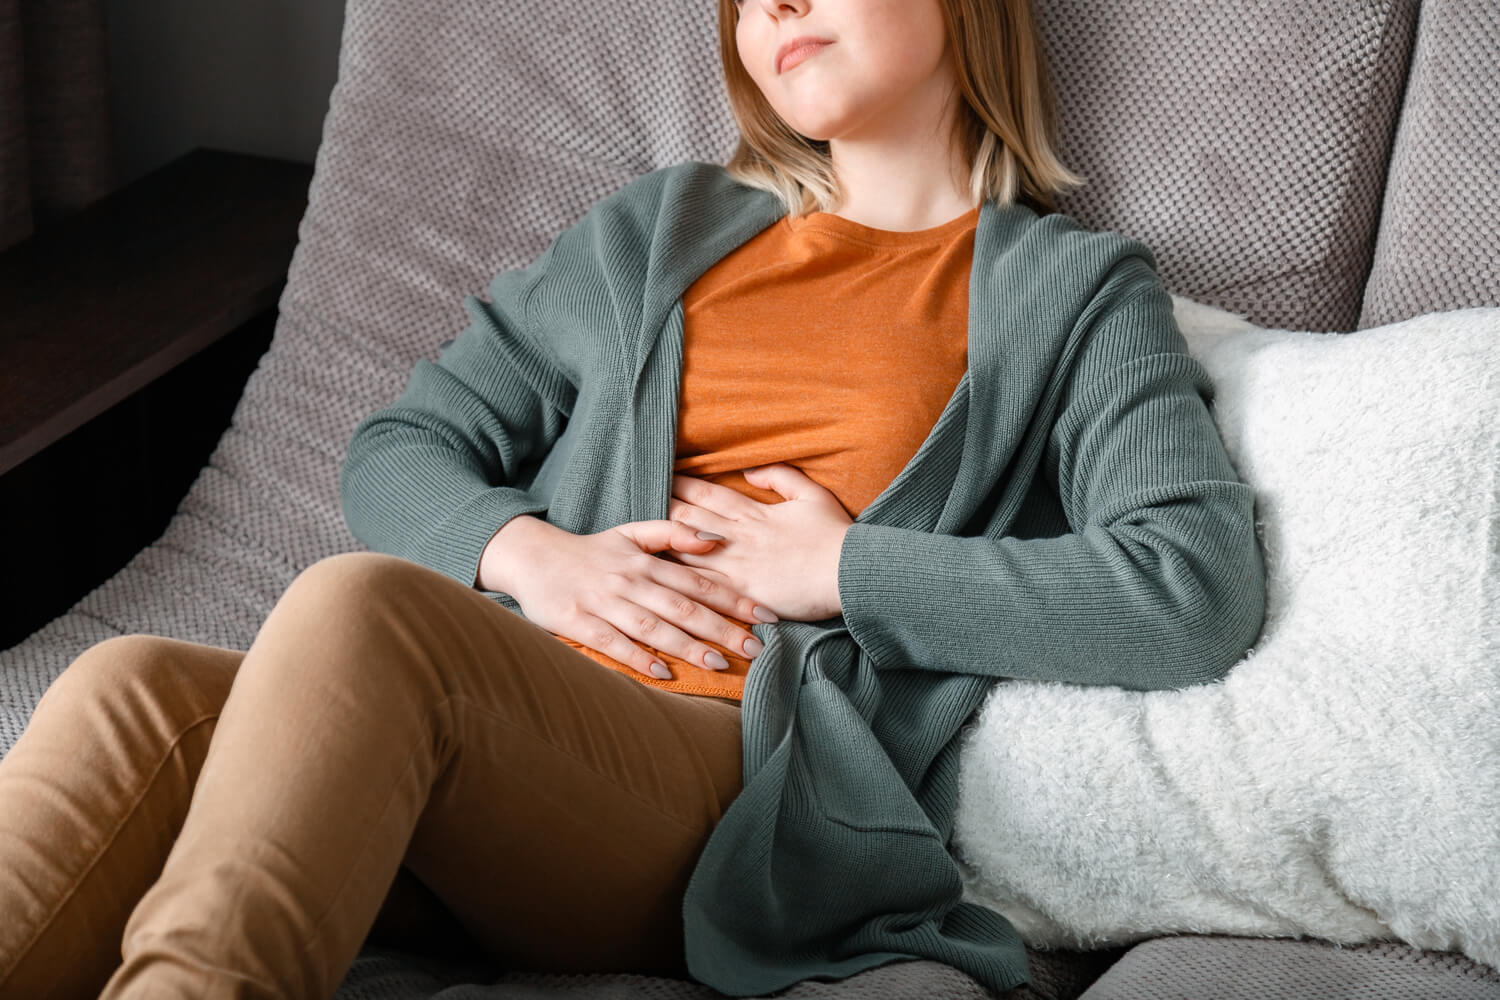 Polycystic Ovarian Syndrome (PCOS) and Pregnancy